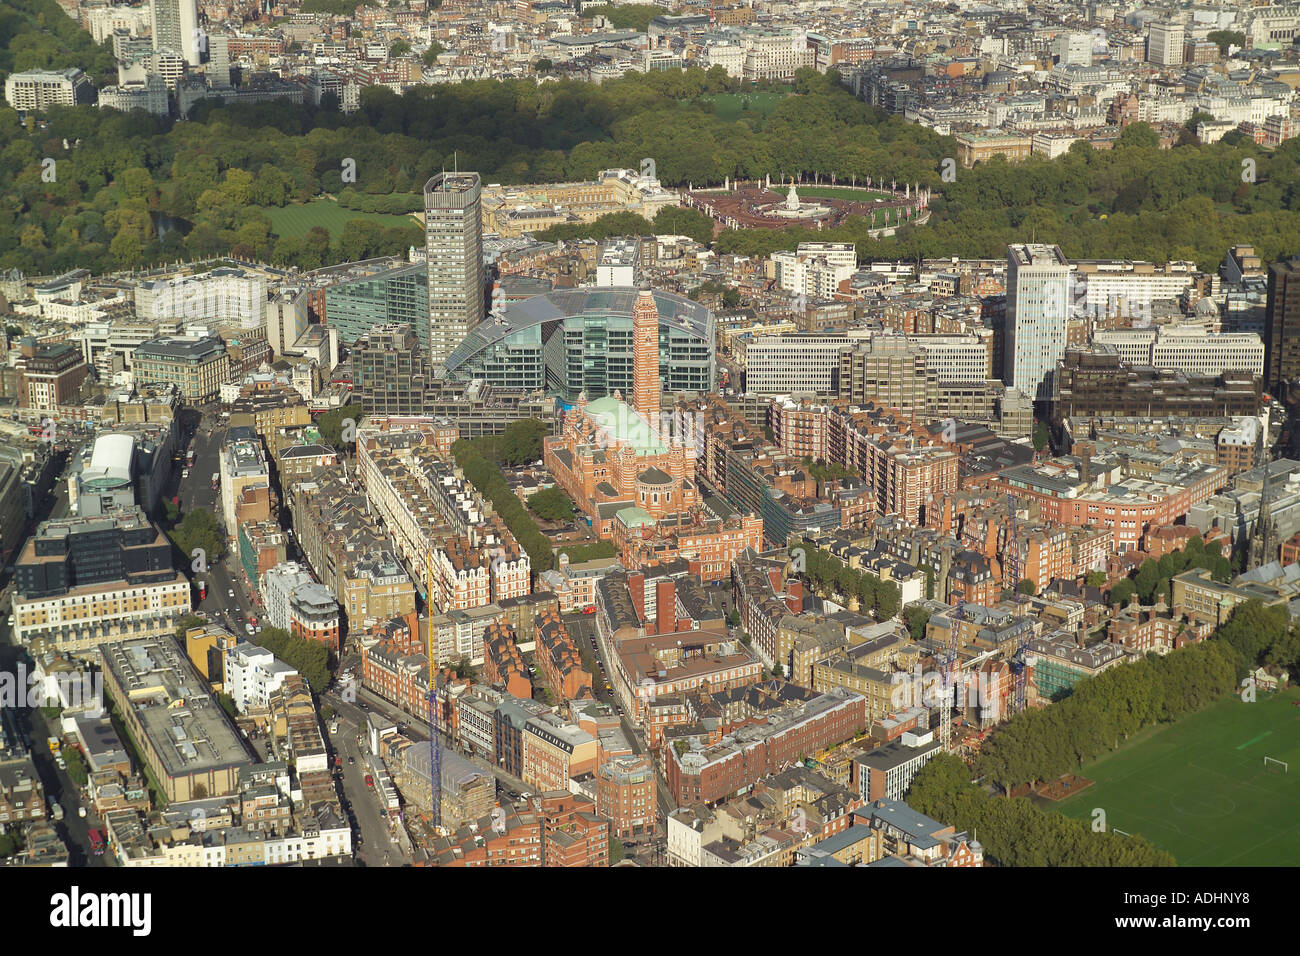 Aerial view of Westminster Cathedral in London with Buckingham Palace and Cardinal Place Shopping Centre in the background Stock Photo